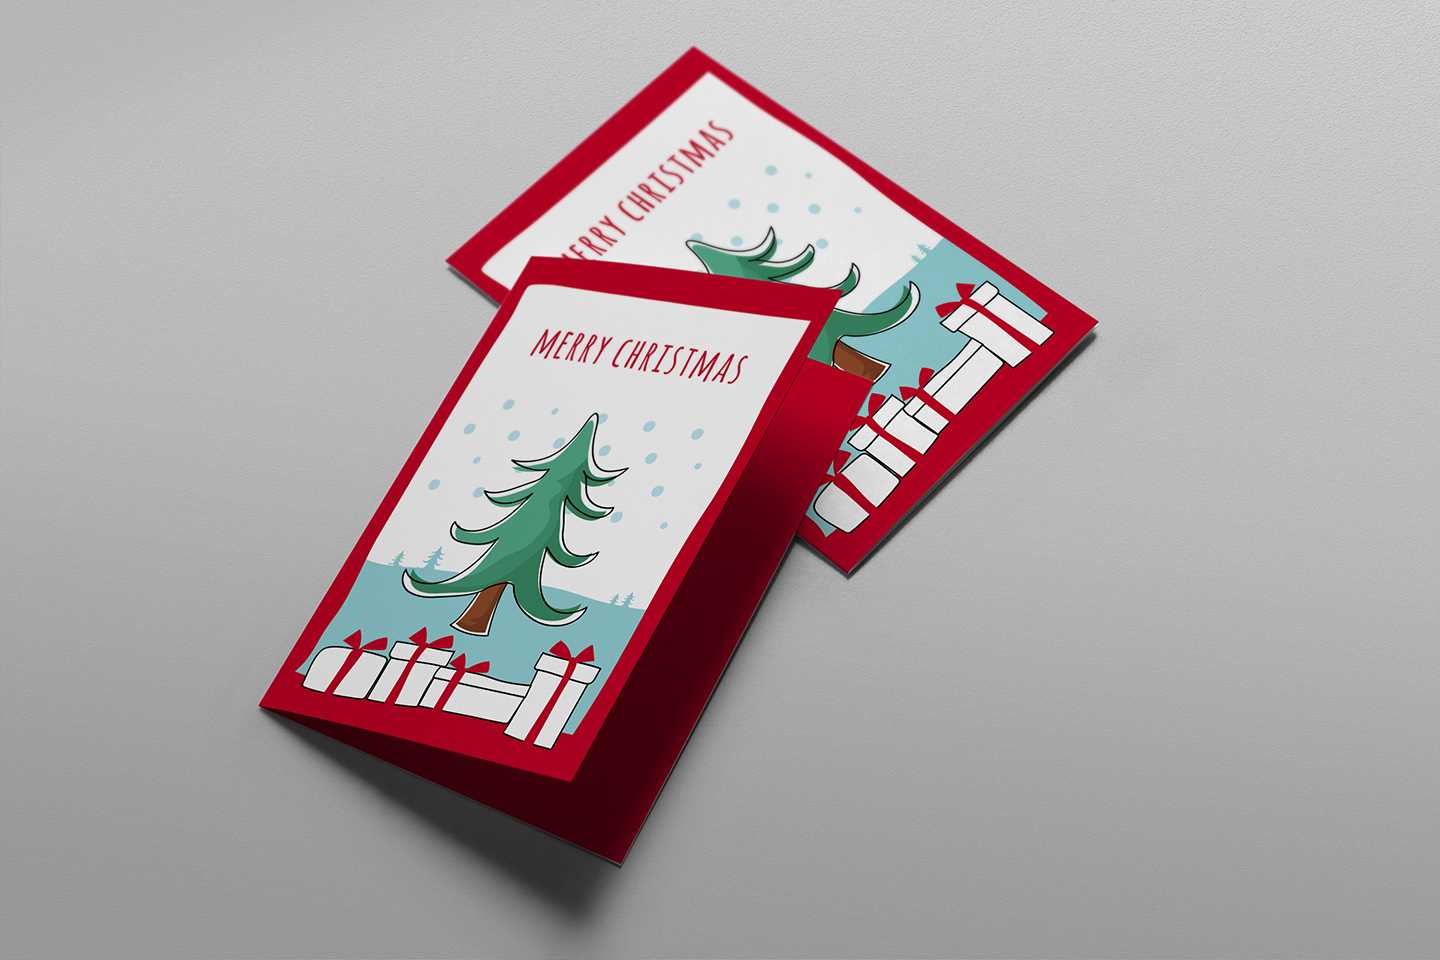 Free Christmas Card Templates For Photoshop & Illustrator Pertaining To Free Christmas Card Templates For Photoshop